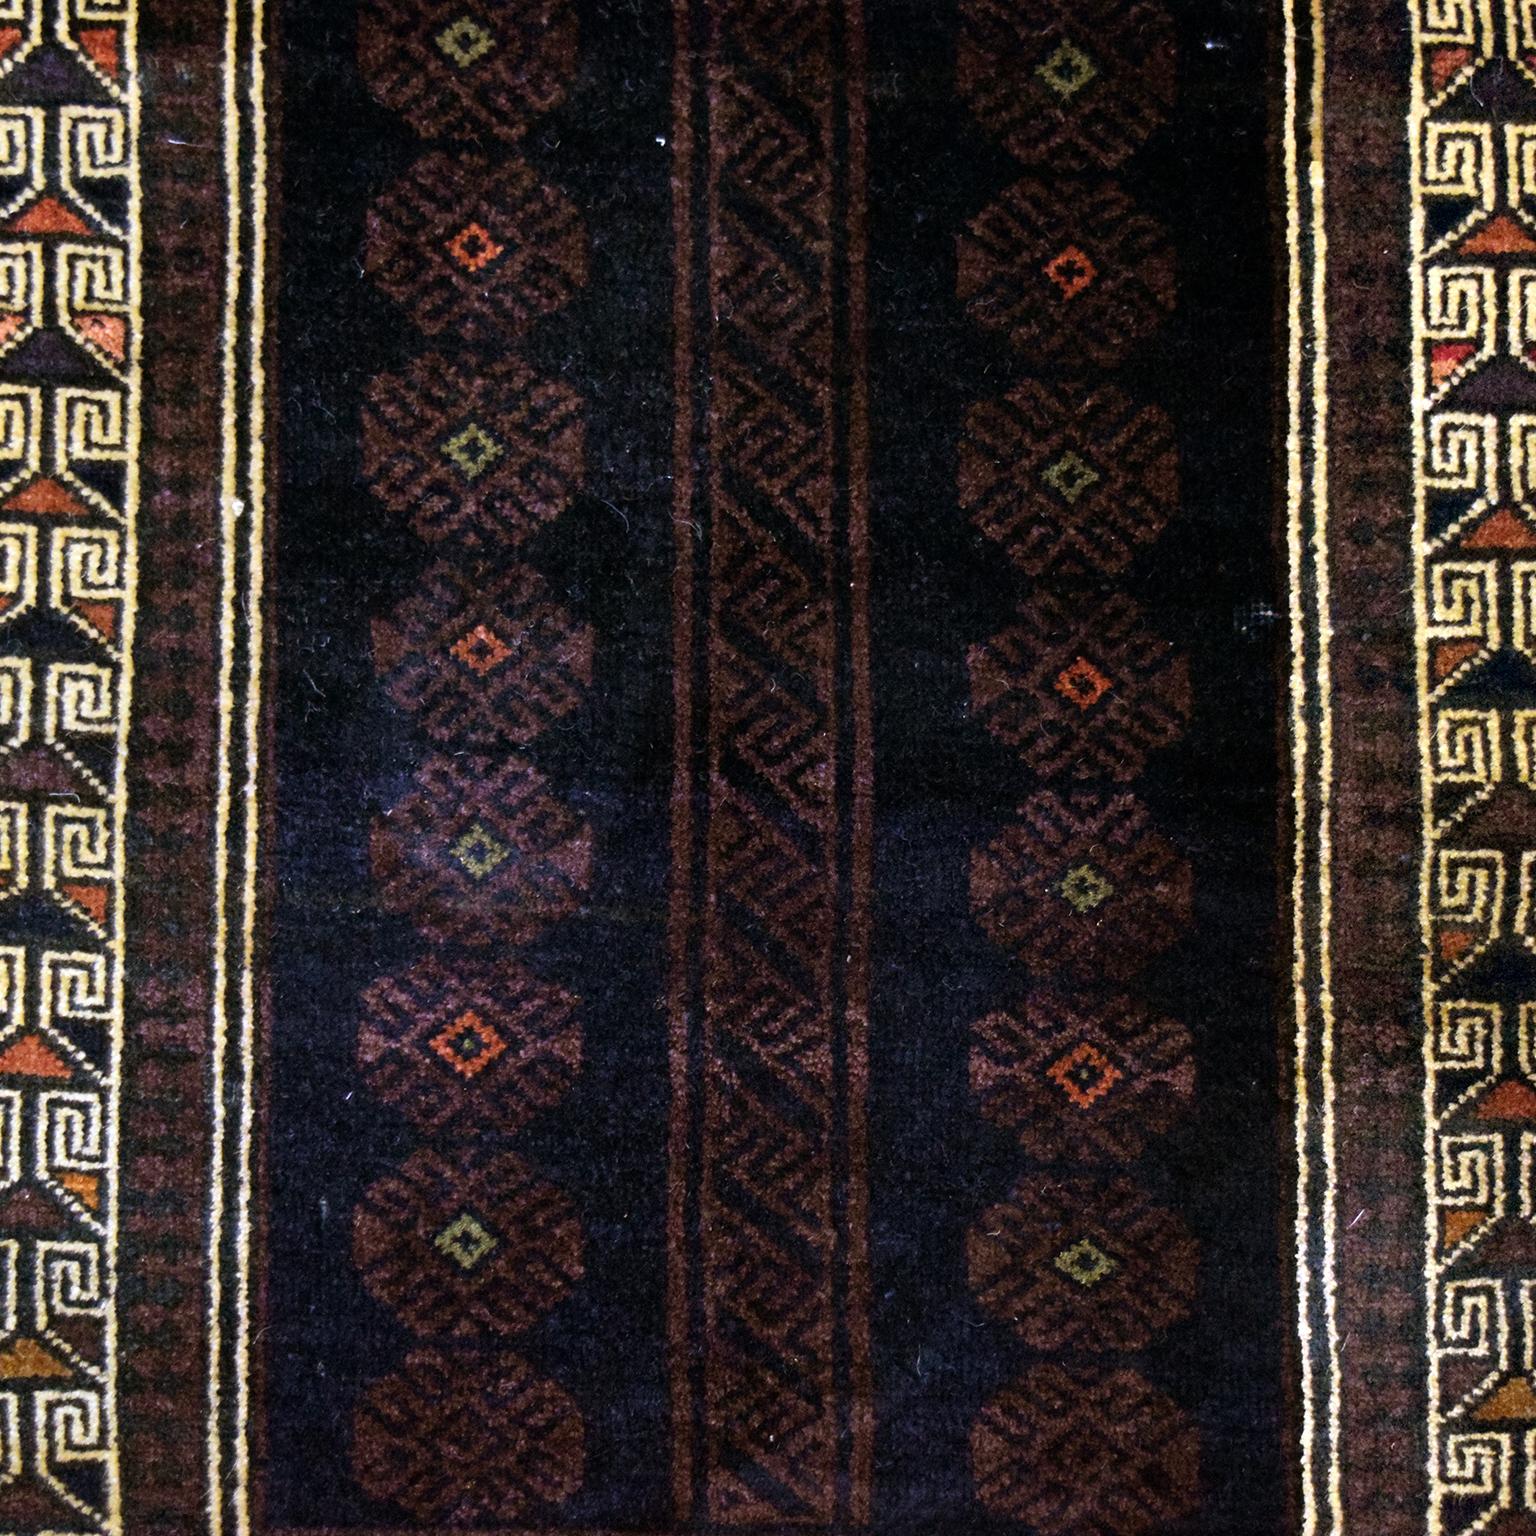 Hand-Knotted Traditional Persian Balouchi Carpet in Cream, Orange, Brown, and Black Wool